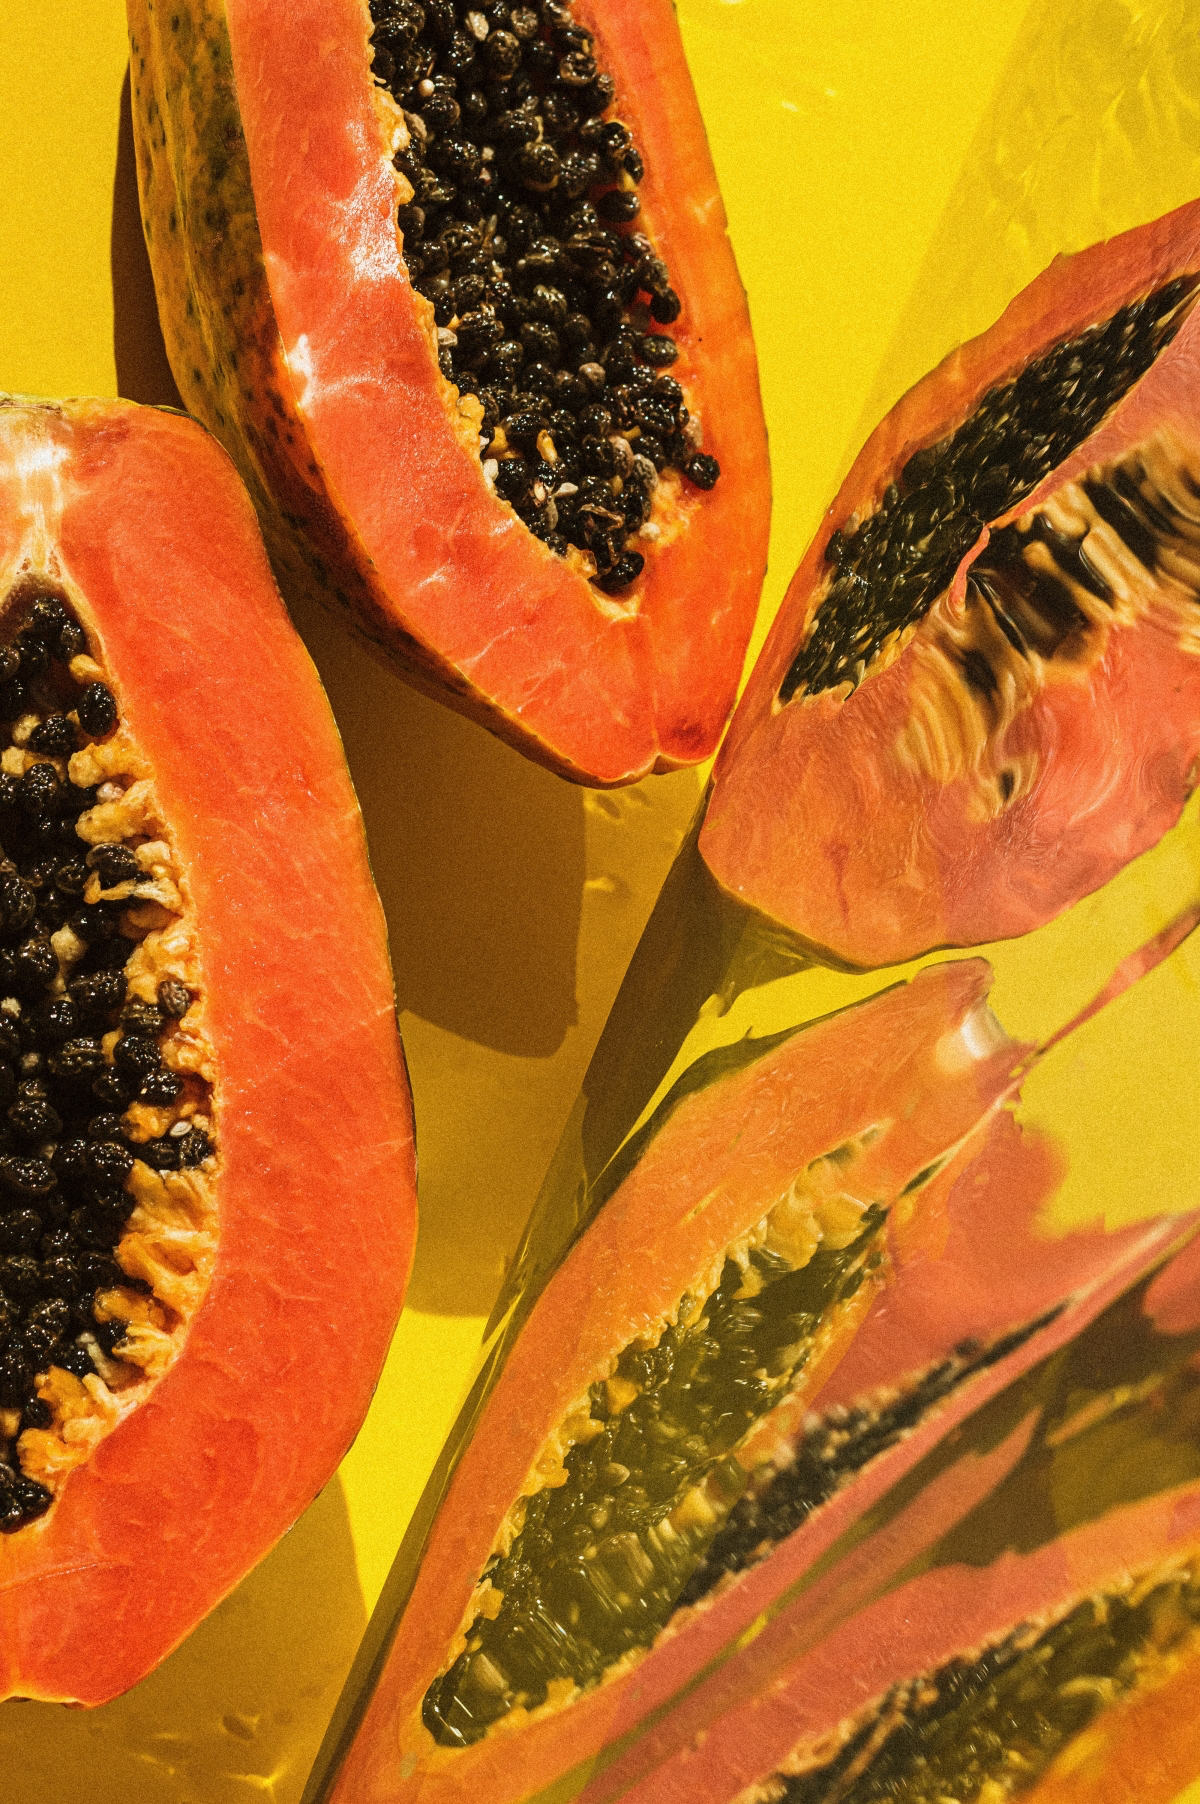 what are the benefits of eating a papaya